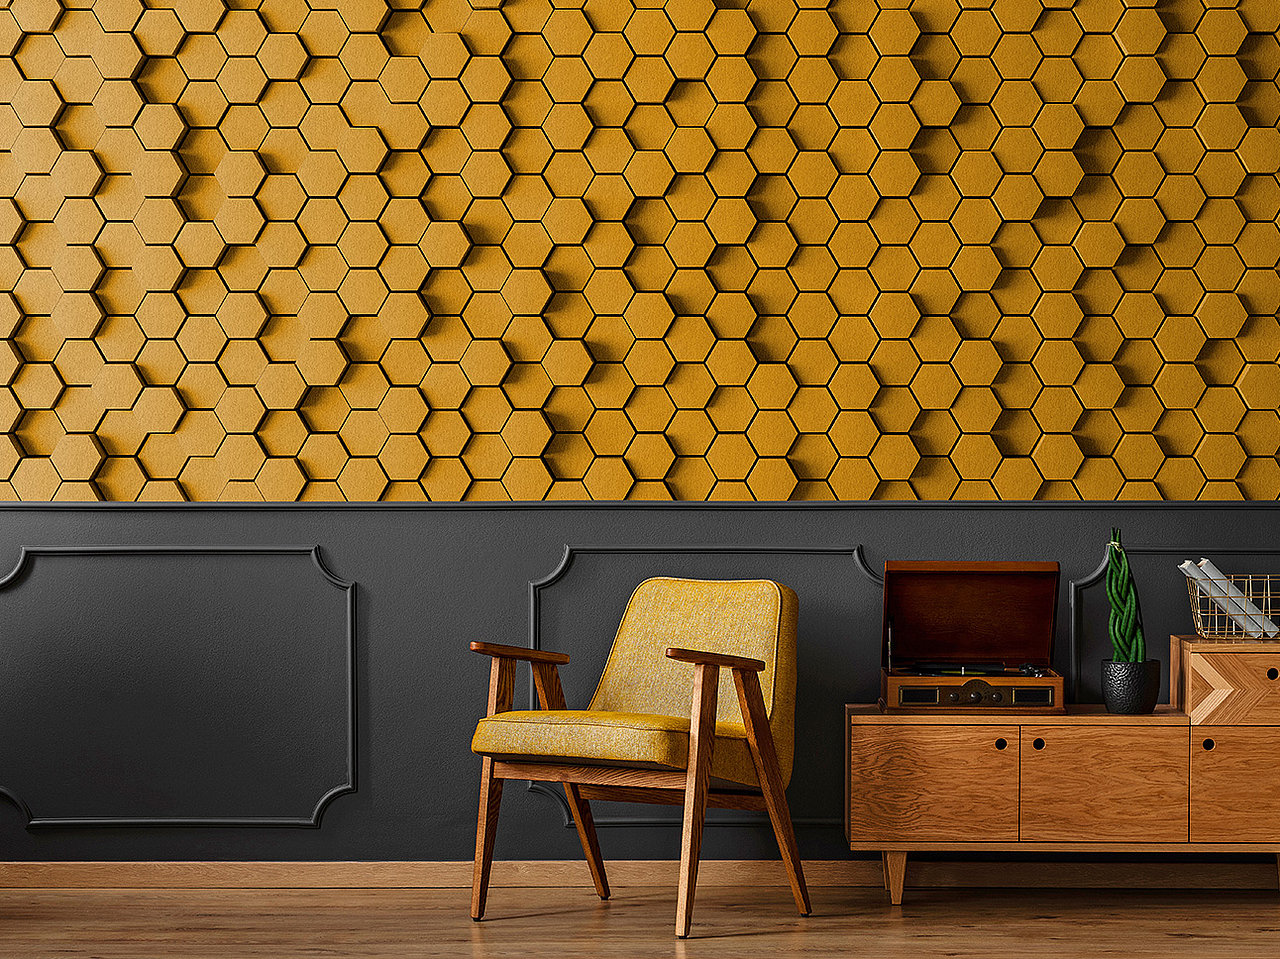 Honeycomb 1 - 3D wall mural with yellow honeycomb design